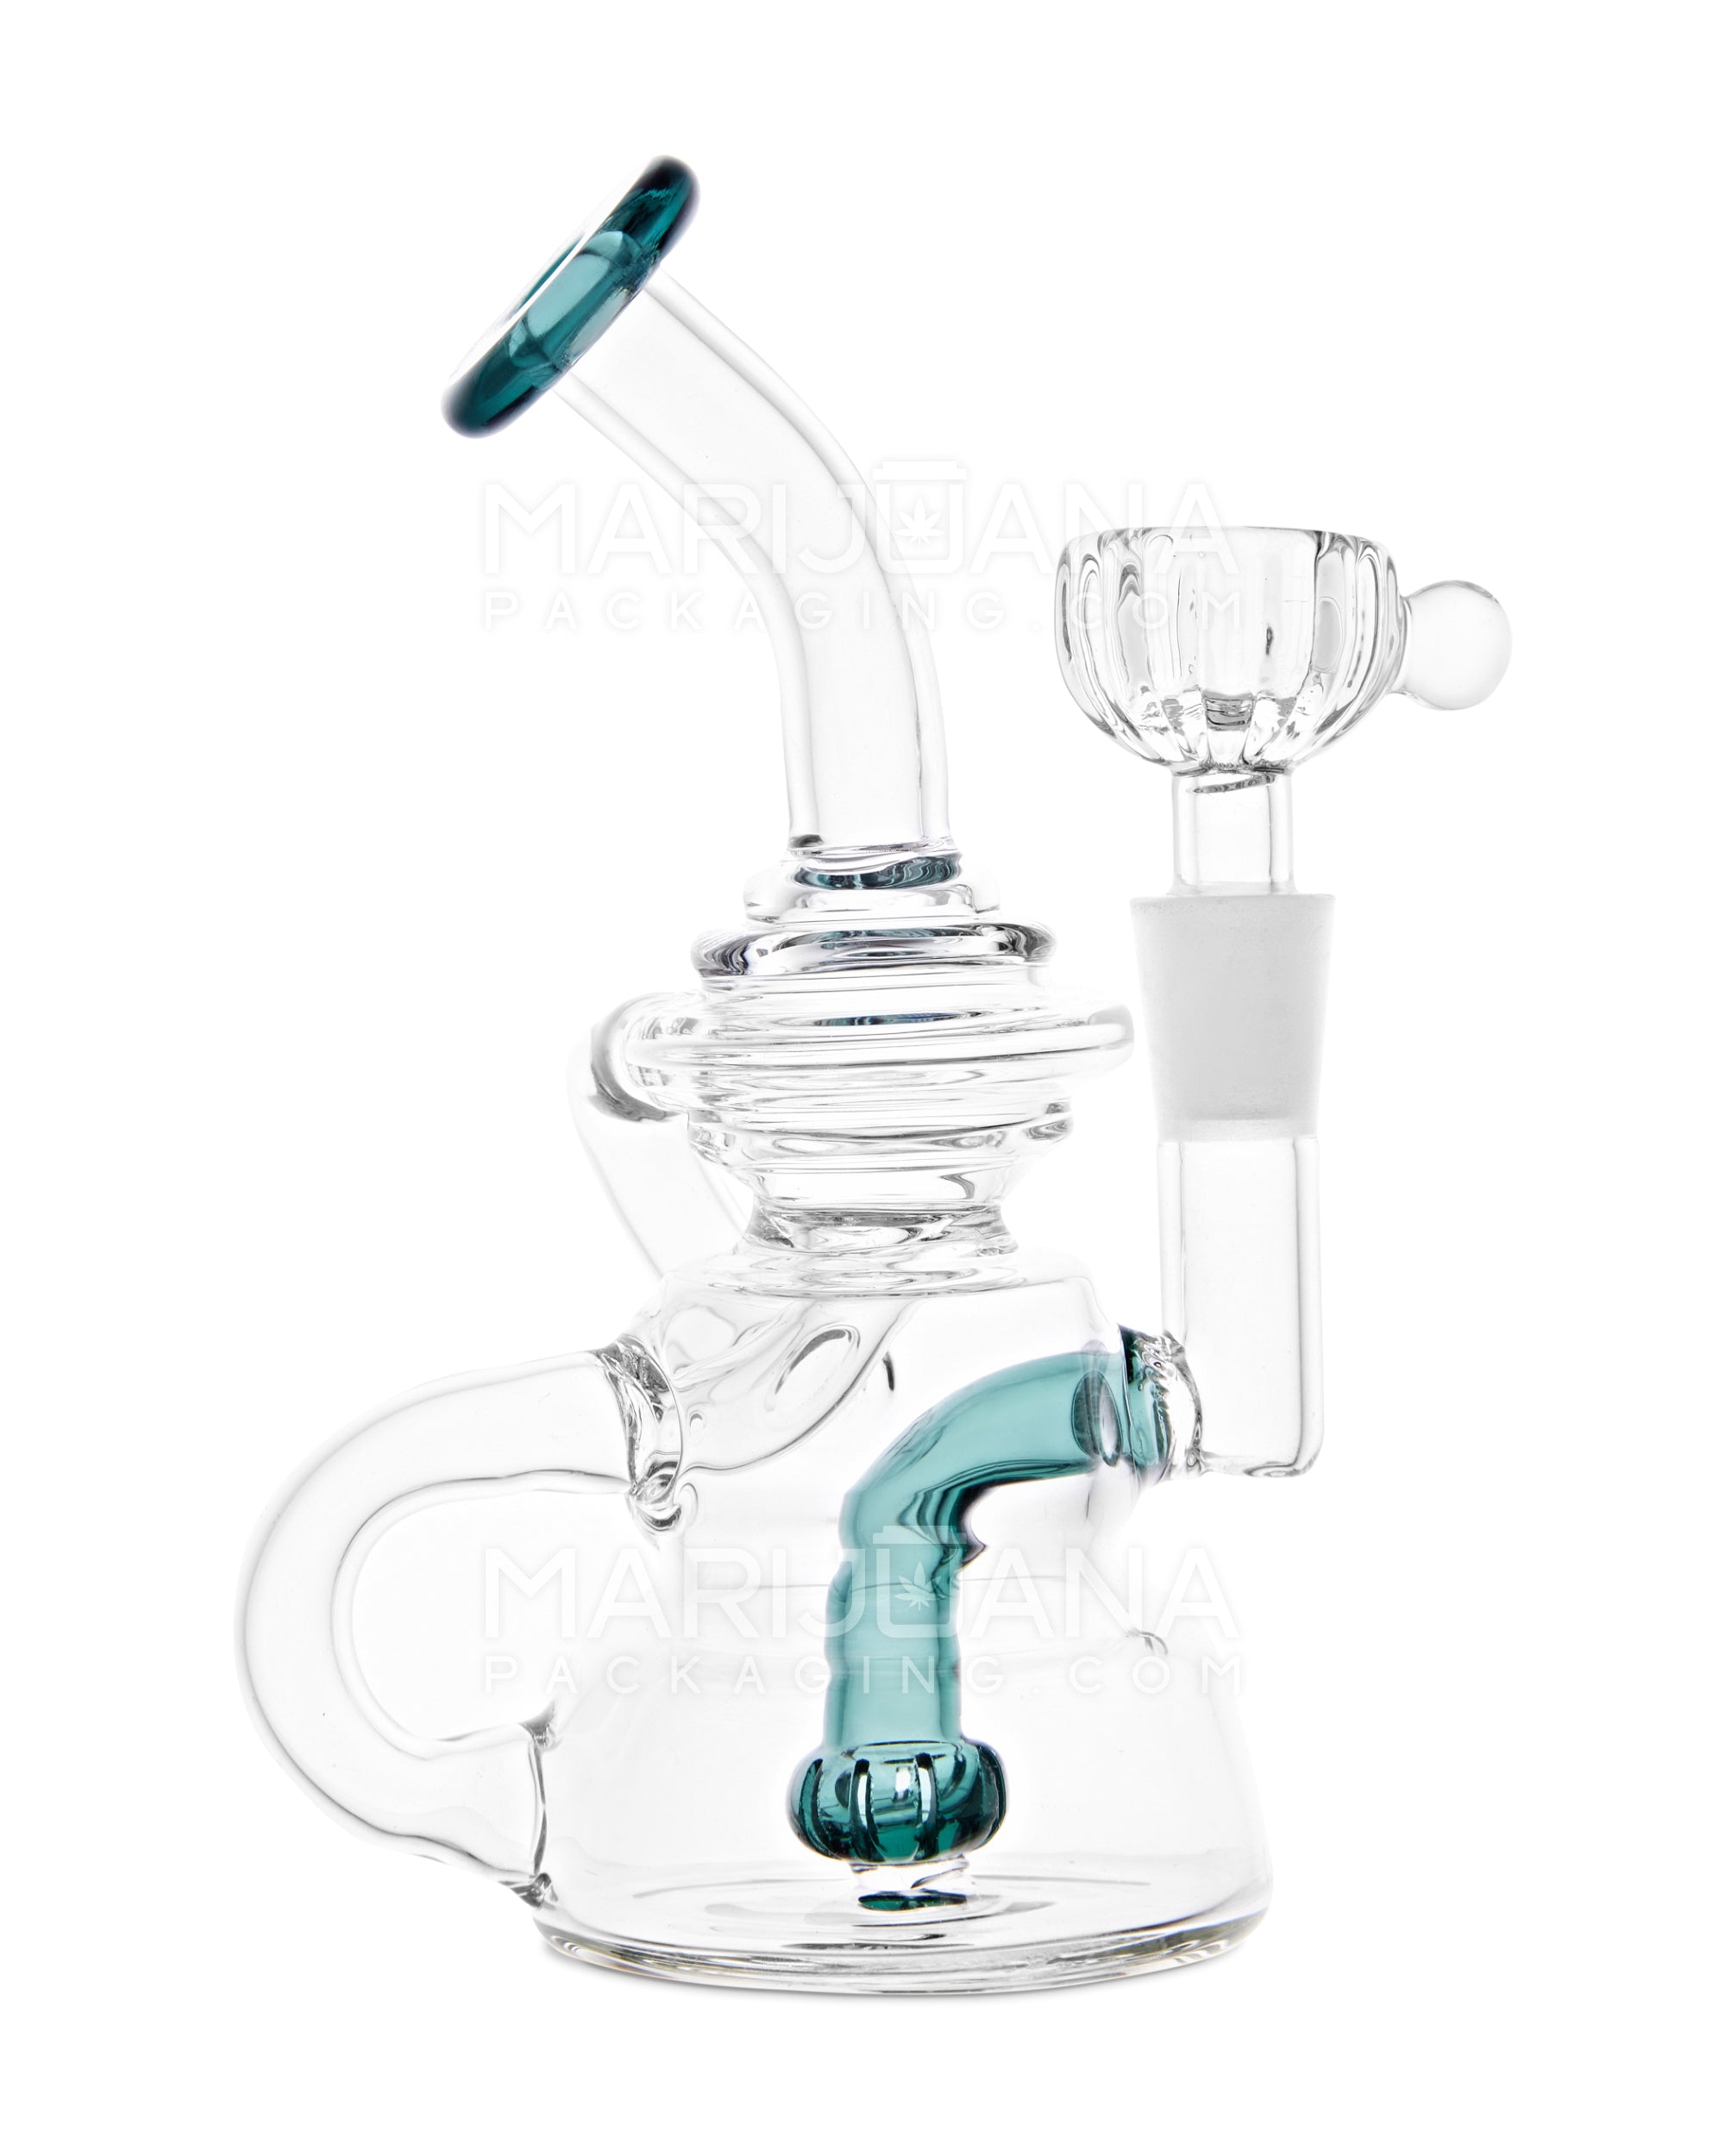 USA Glass | Bent Neck Single Uptake Recycler Water Pipe w/ Orb Perc | 5.5in Tall - 10mm Bowl - Teal